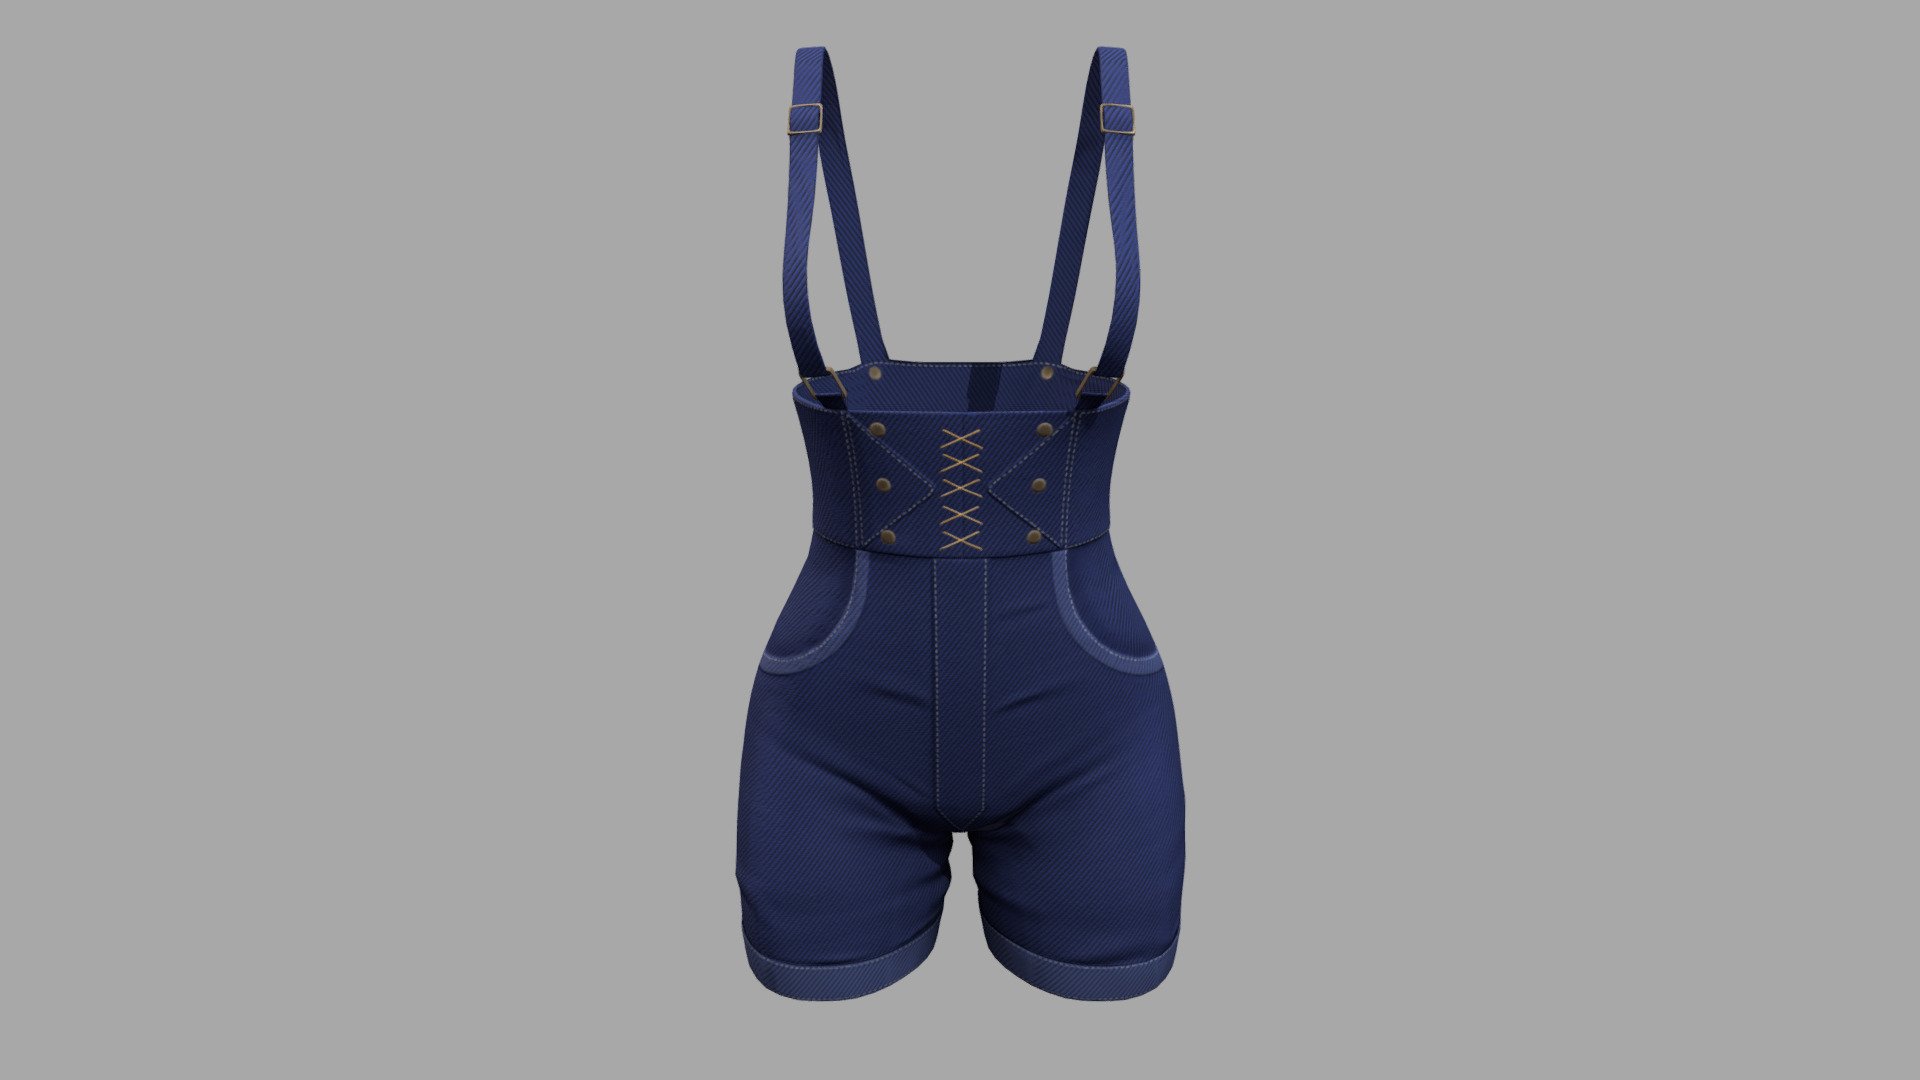 Female Denim Shorts Overalls

Can be fitted to any character

Clean topology

No overlapping smart optimized unwrapped UVs

High-quality realistic textures

FBX, OBJ, gITF, USDZ (request other formats)

PBR or Classic

Type     user:3dia &ldquo;search term